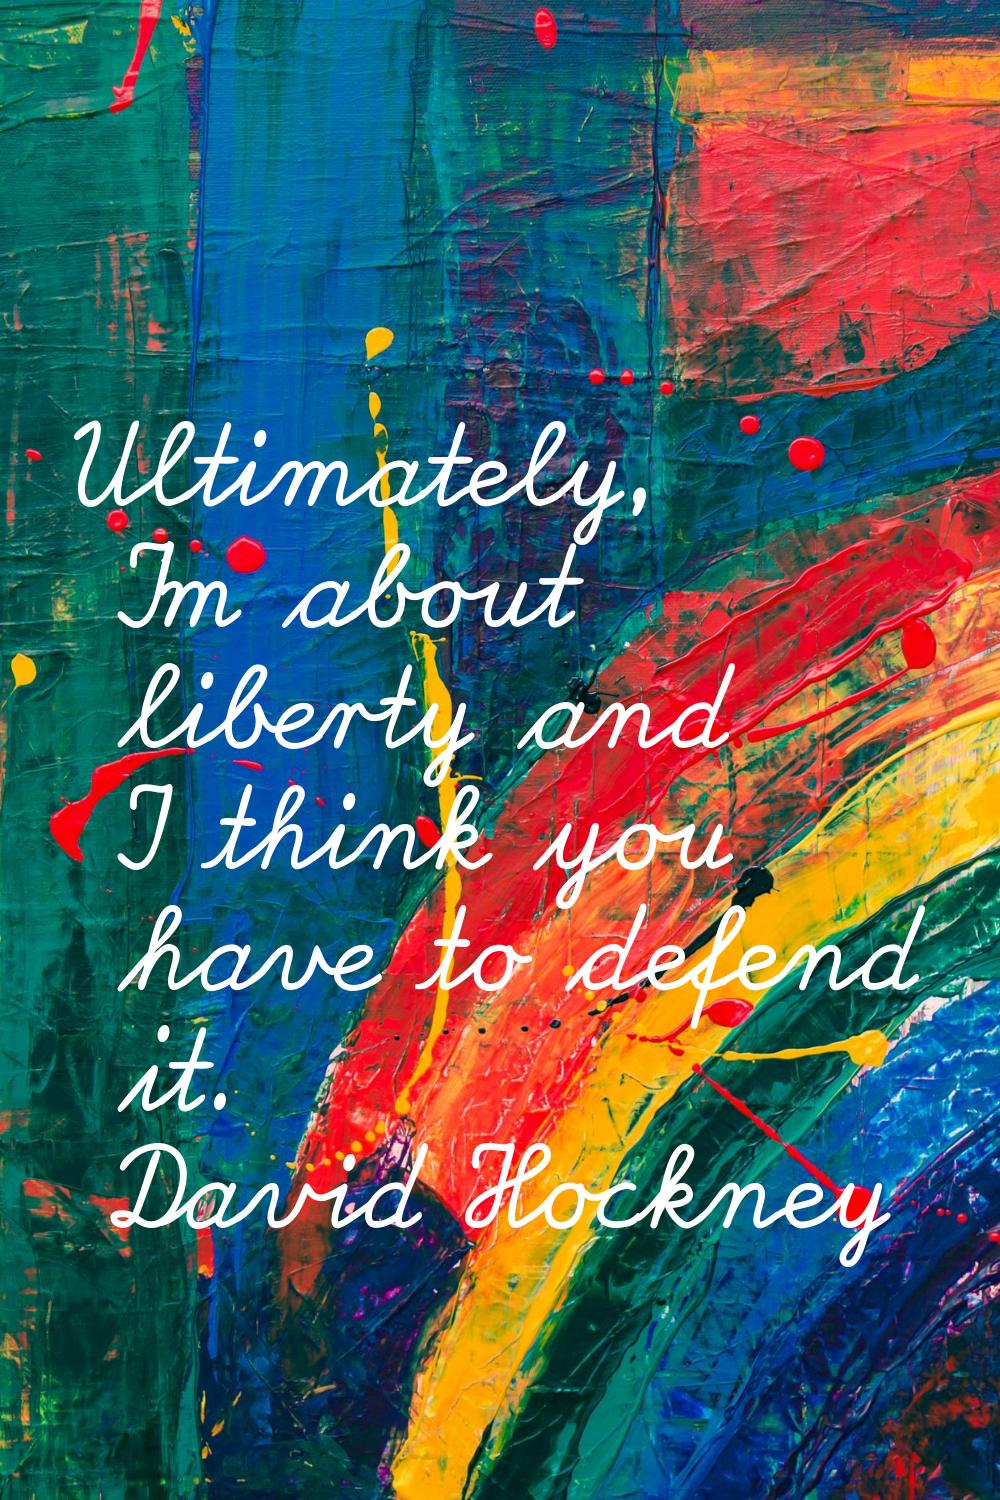 Ultimately, I'm about liberty and I think you have to defend it.